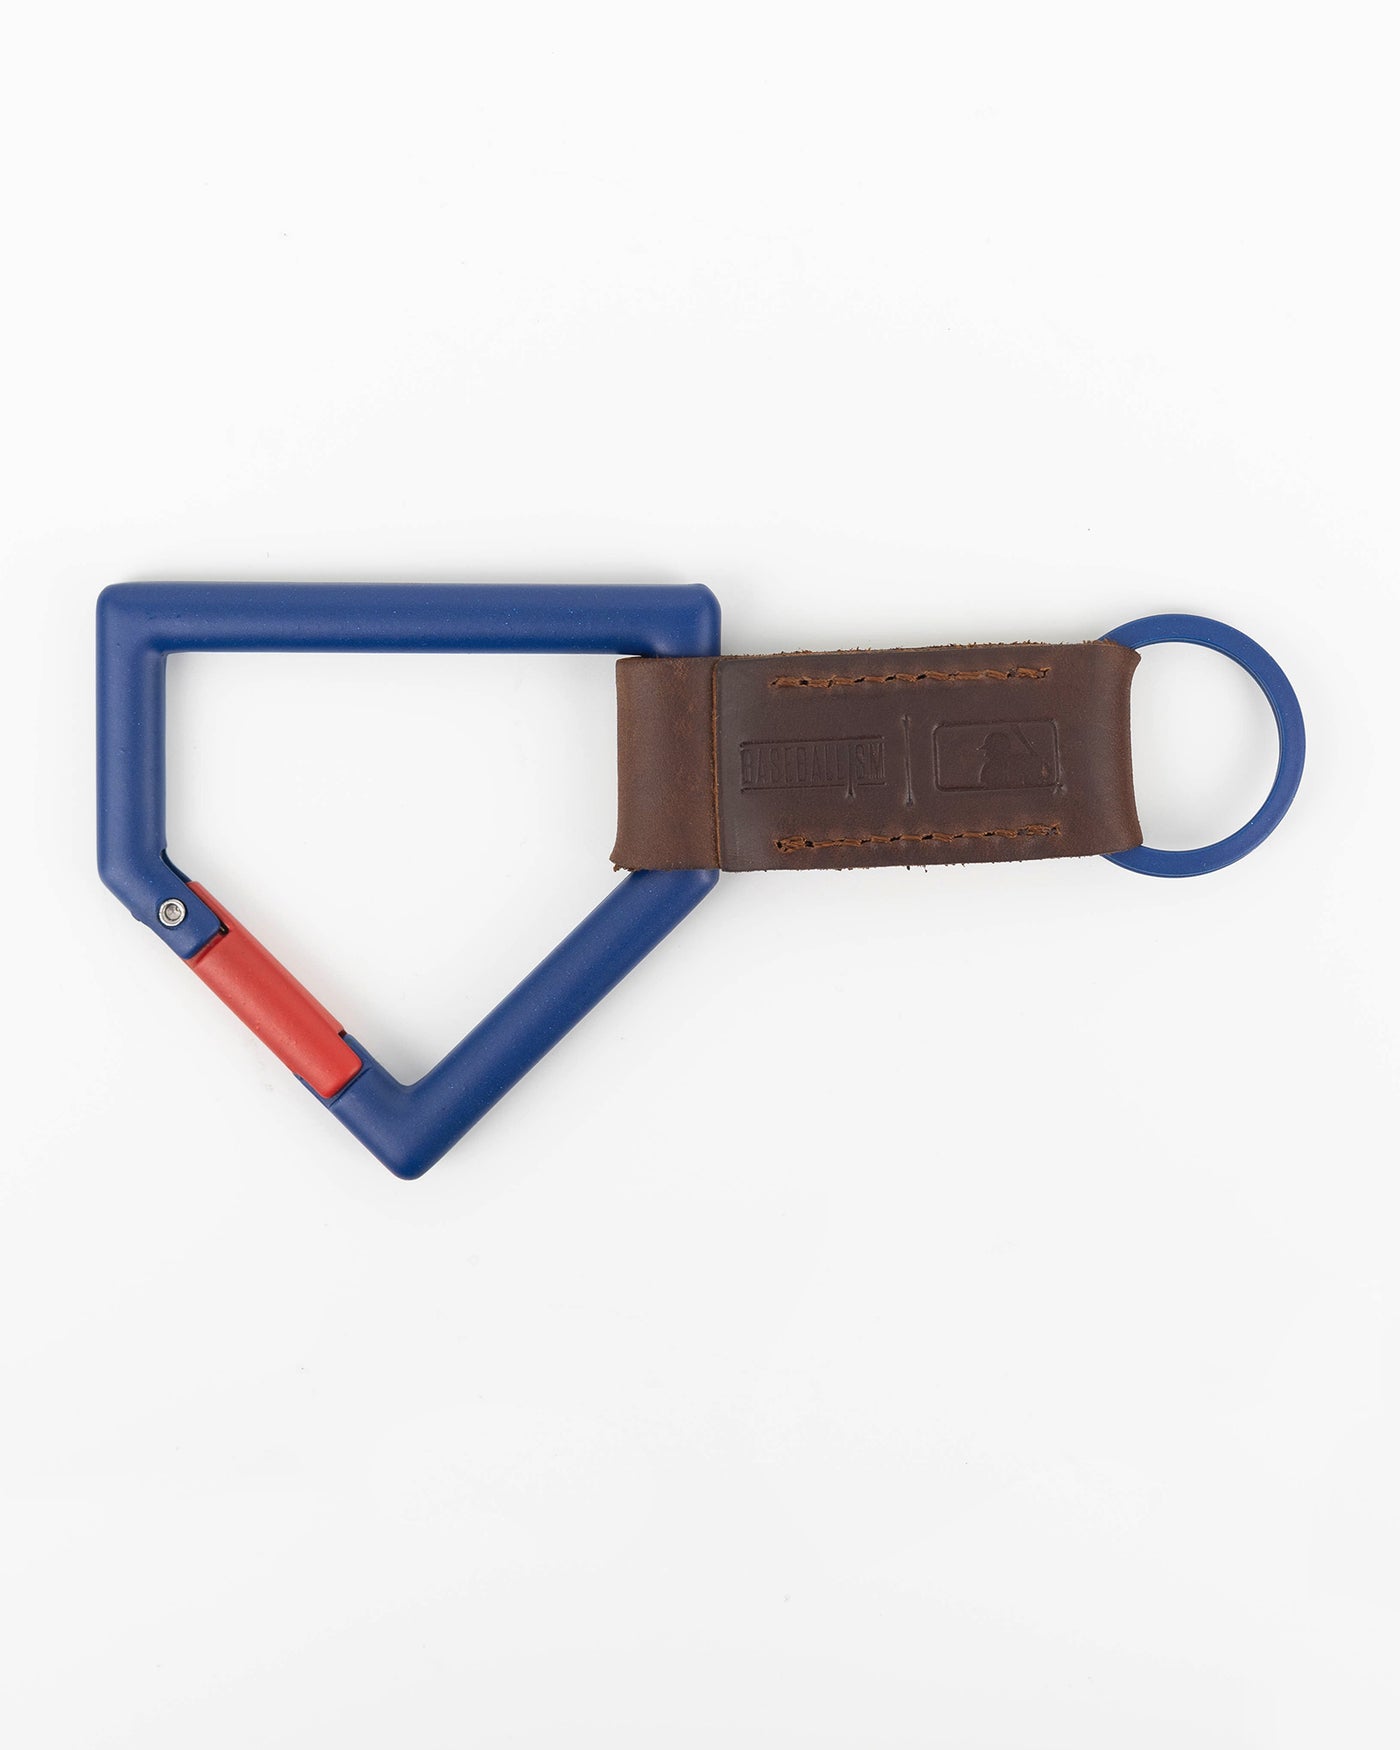 MLB Home Plate Carabiner Key Chain - Chicago Cubs